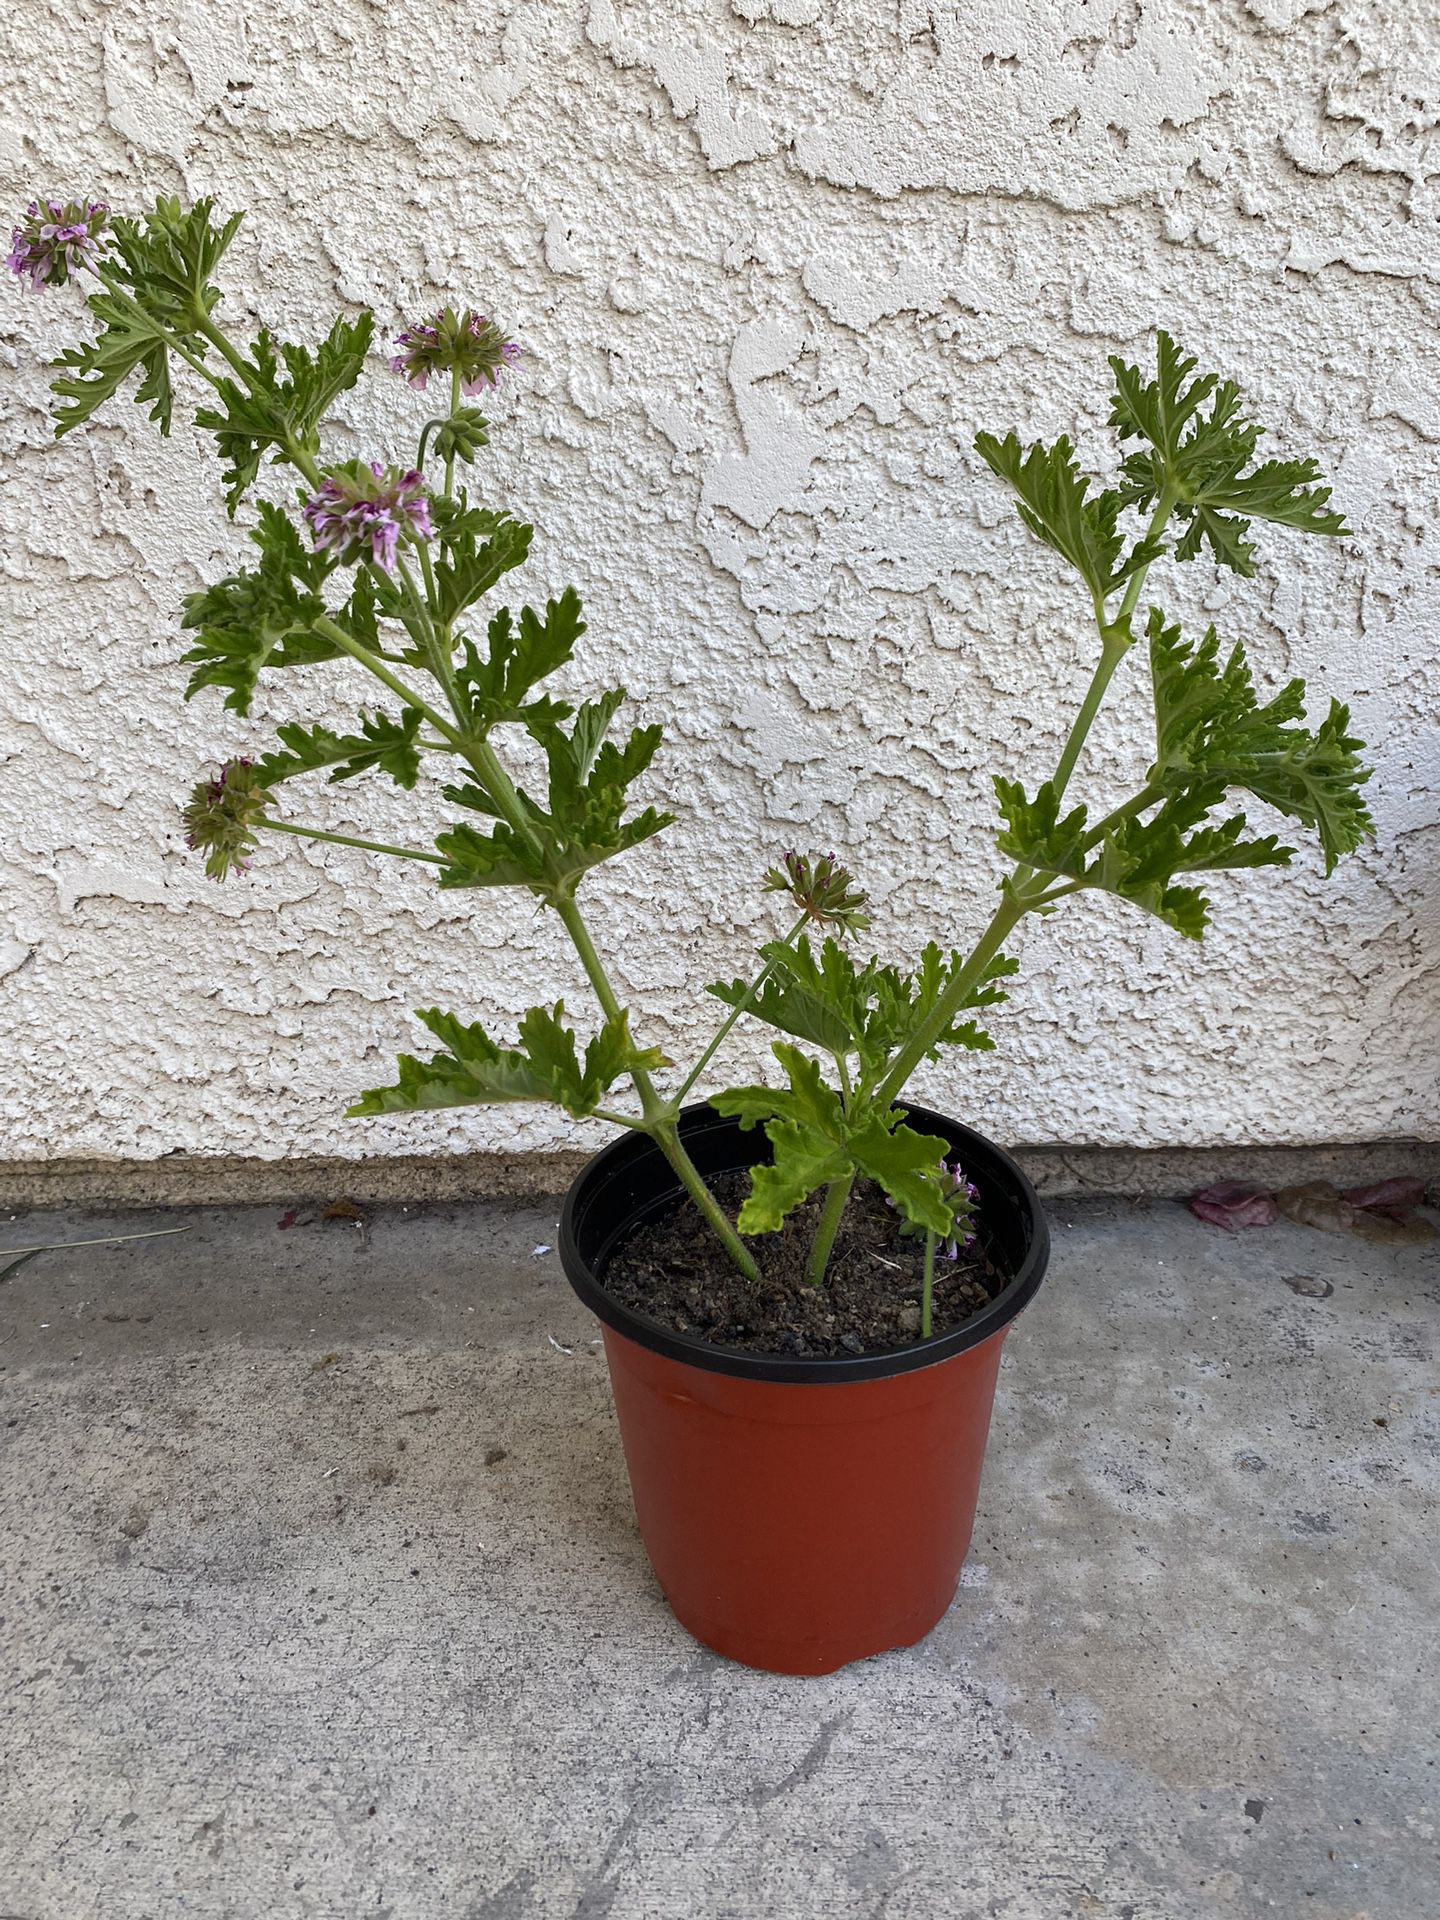 6 inch pot - Mosquito Repellent citronela plant - Rooted 1 Feet Tall. Rooted and Ready citronella pt - beautiful lilac flowers - drought resistant 